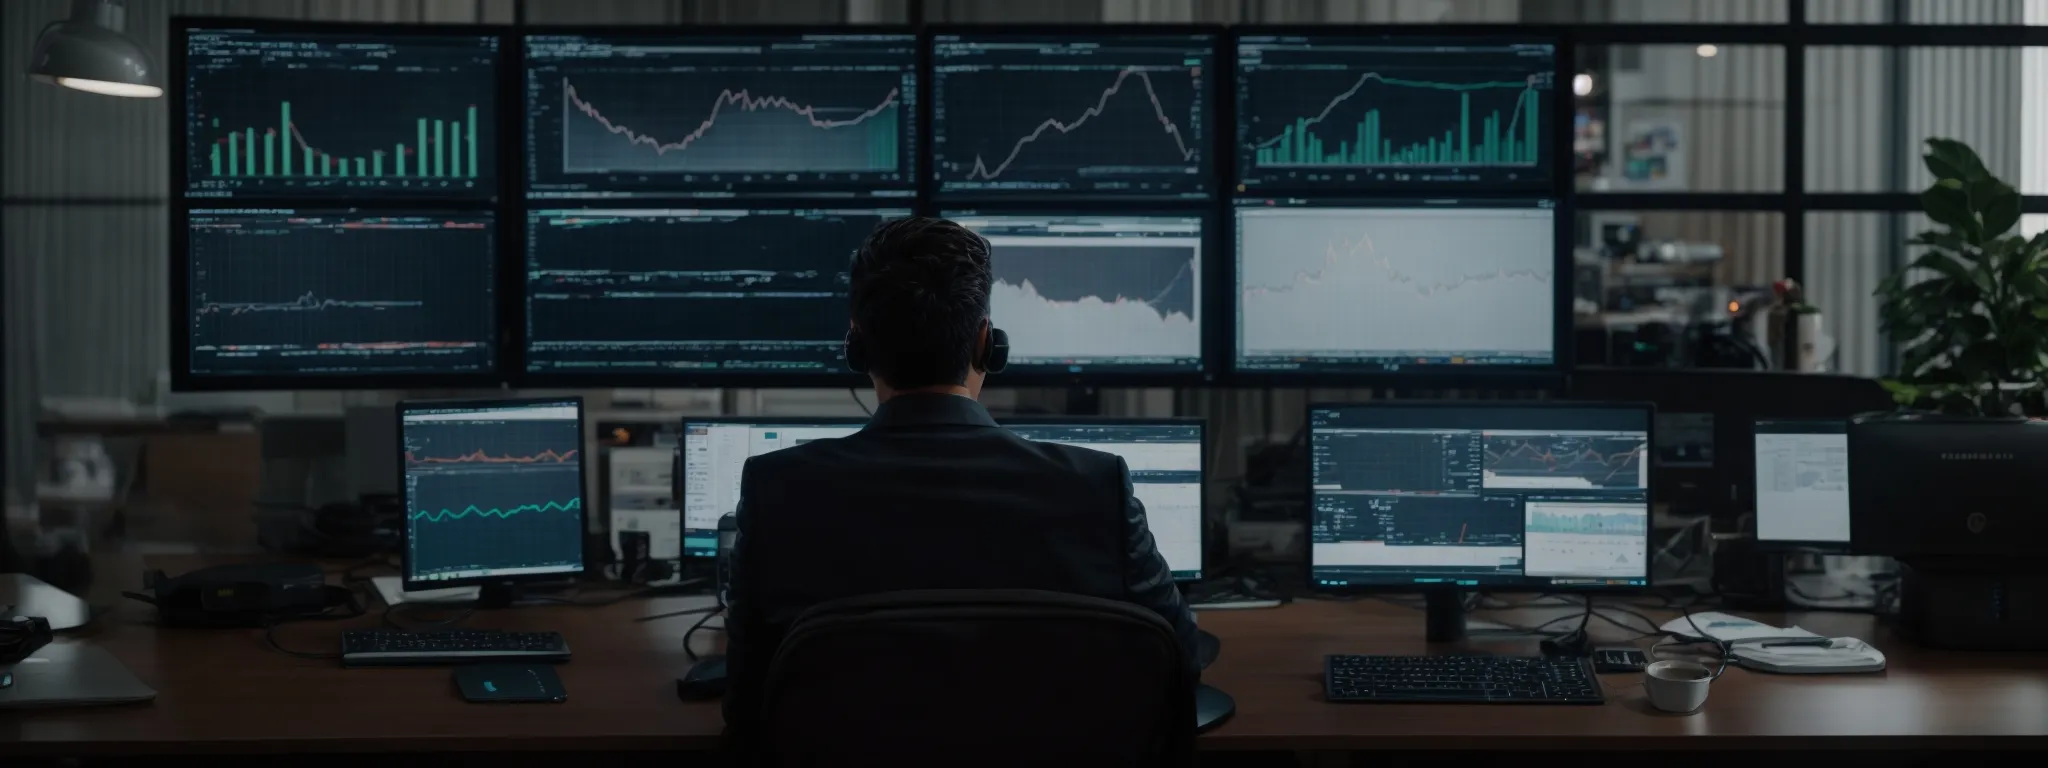 a person sitting at a desk with multiple computer monitors displaying graphs and analytics.